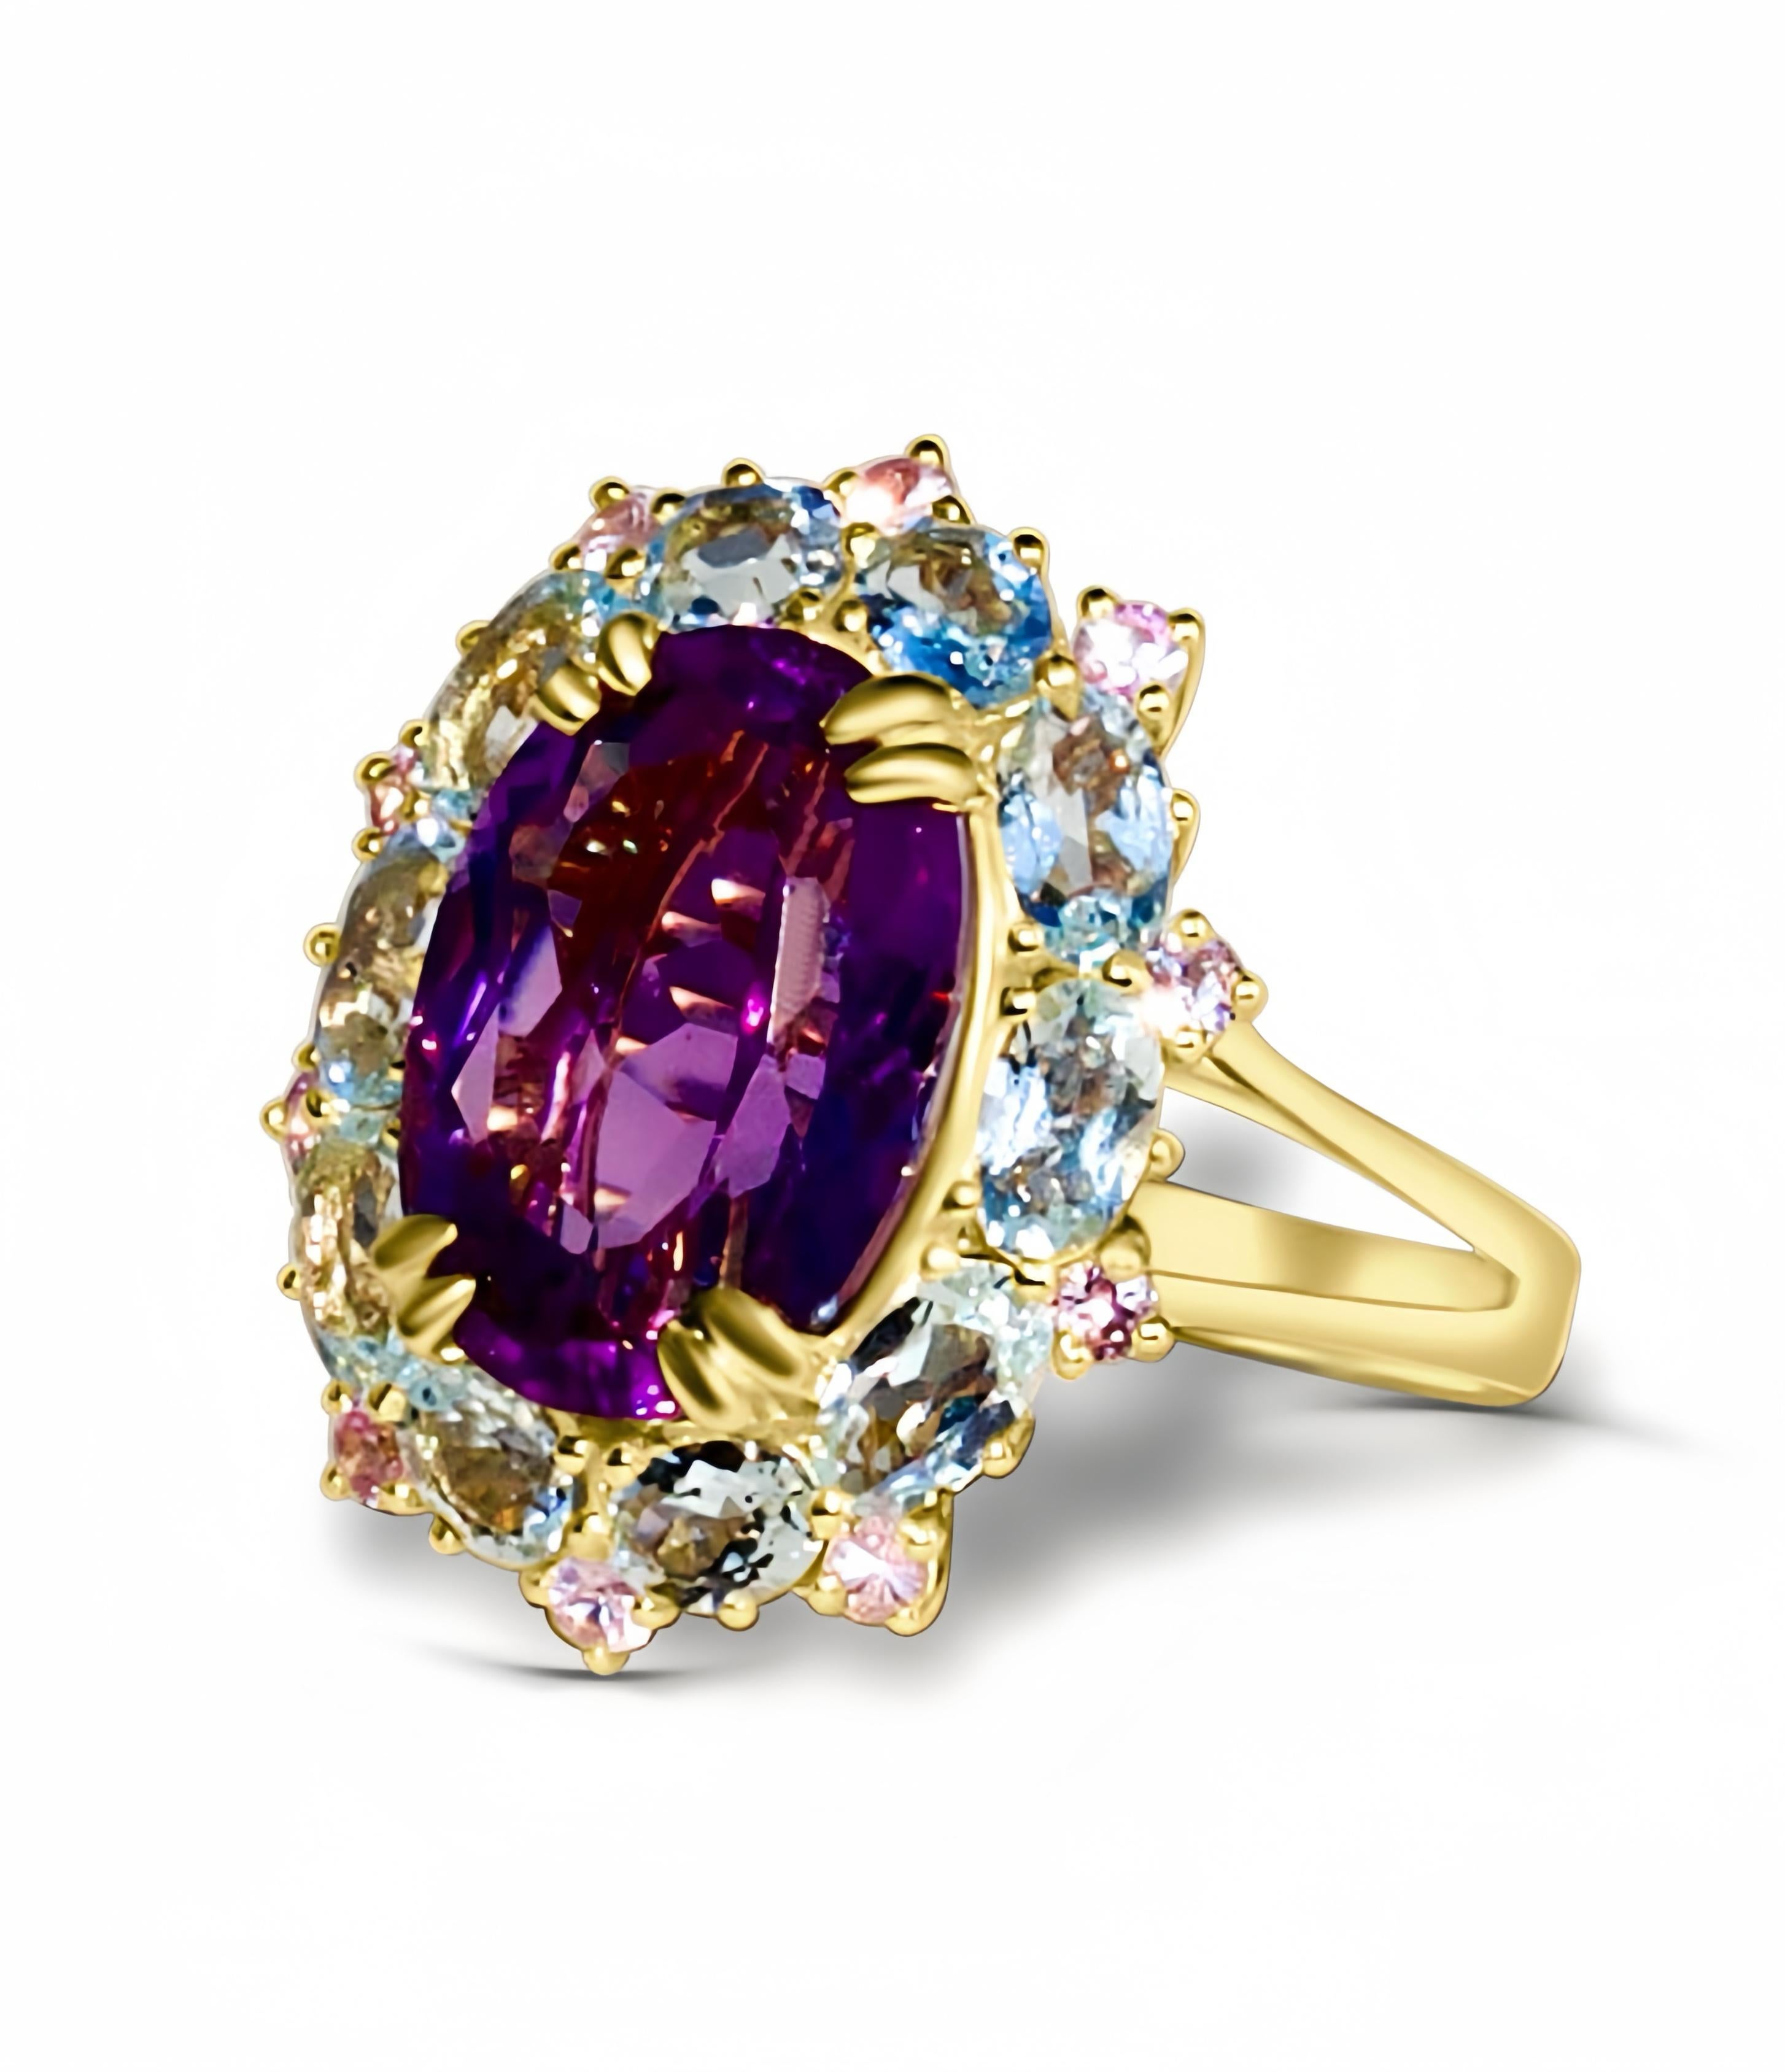 Discover Kai's Purple Amethyst Aquamarine Pink Sapphire Cluster Cocktail Ring in 14k yellow gold, a dazzling work of art that combines the elegance of amethyst, the serenity of aquamarine, and the allure of pink sapphires in one exquisite piece. The